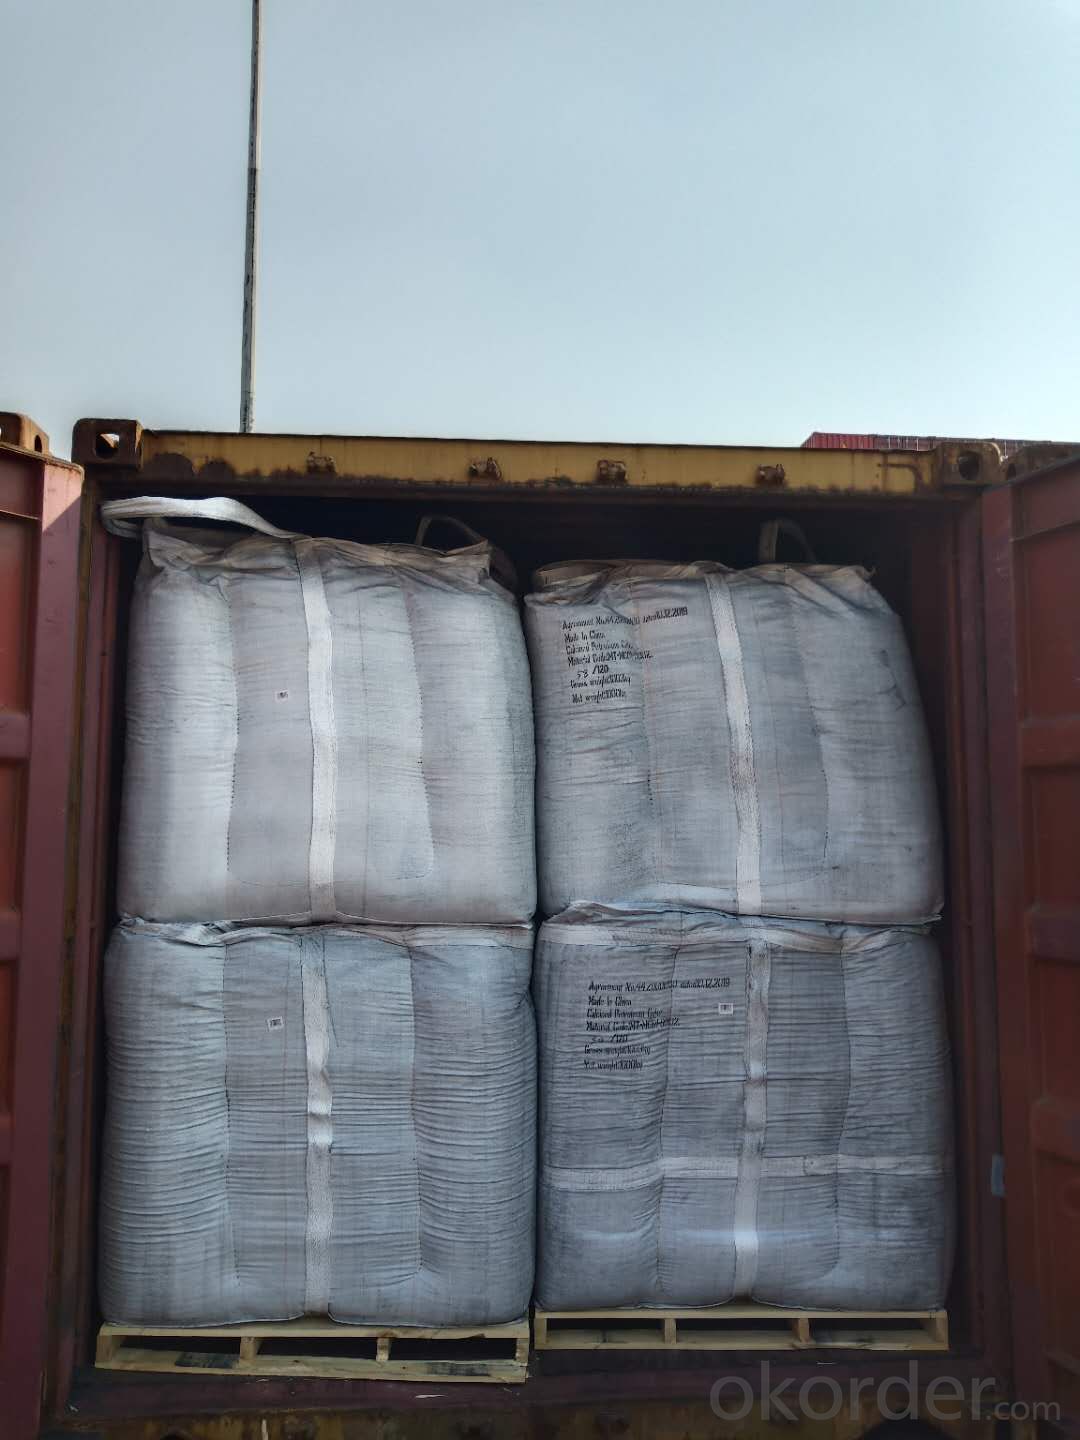 Petroleum coke with competitive price and good quality